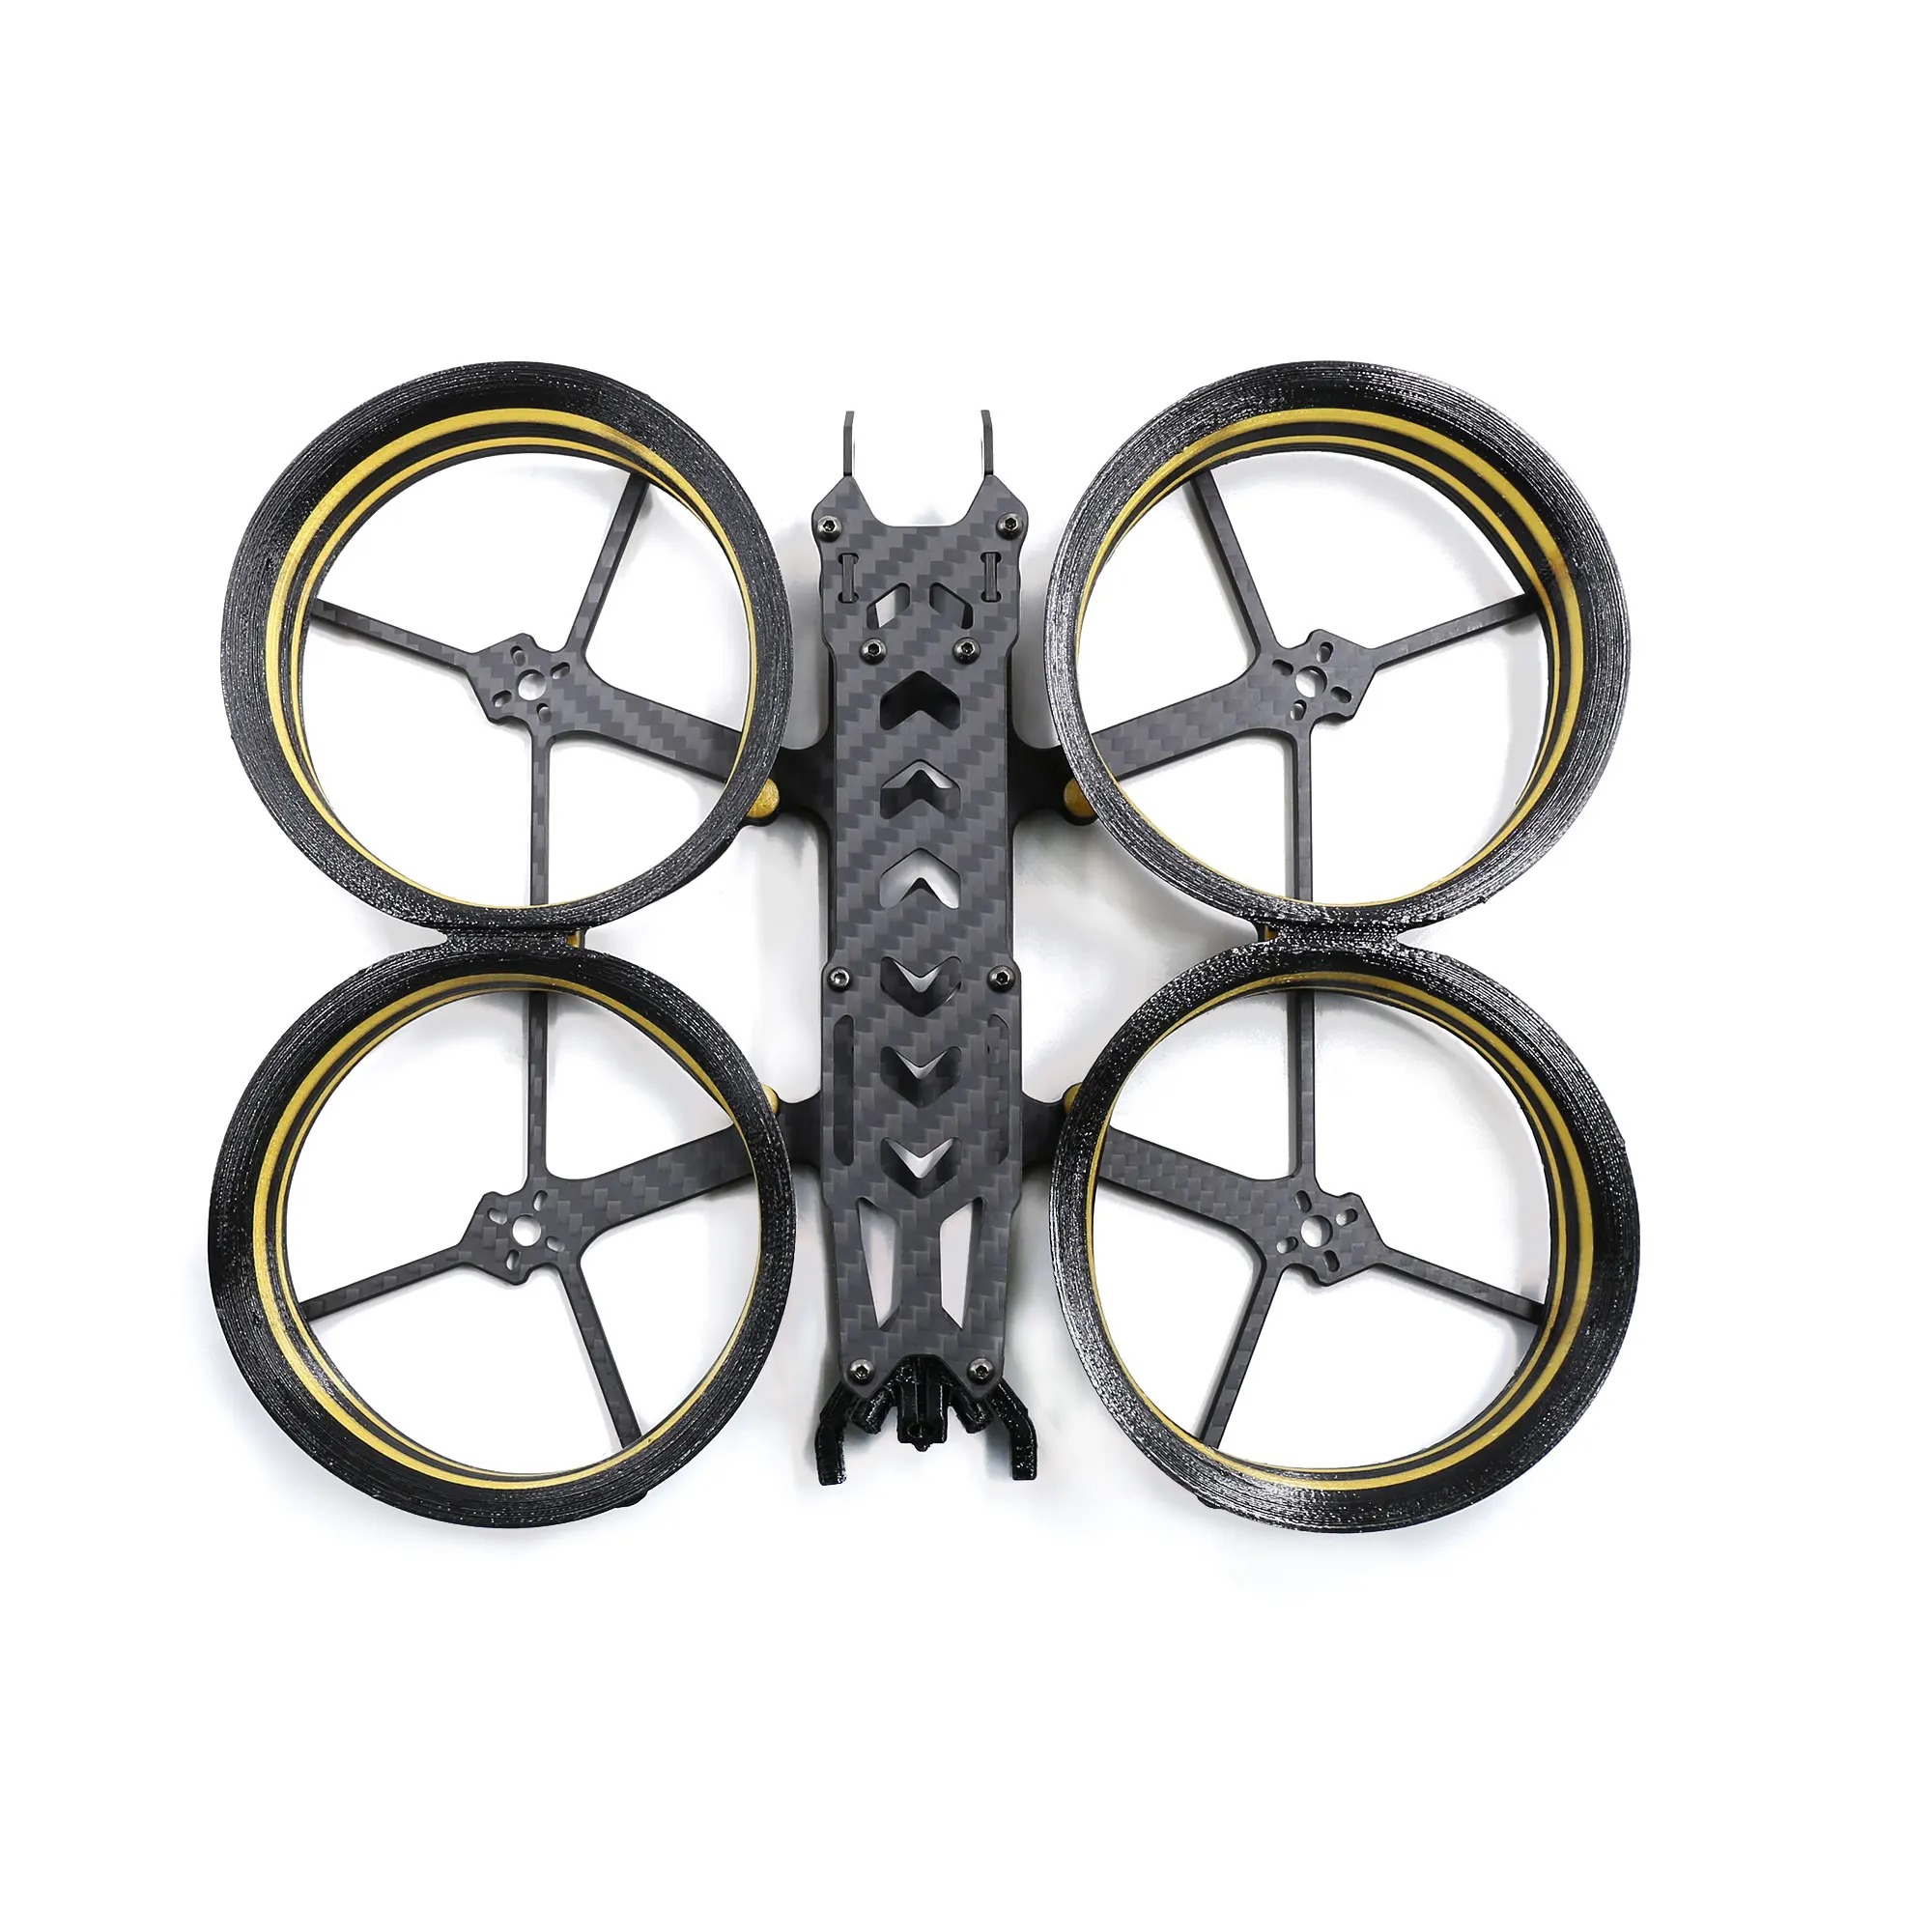 

GEPRC CineGo GEP-CG3 3inch 155mm Cinewhoop Duct FPV Frame for DJI Air Unit Caddx Vista HD for RC FPV Racing Freestyle